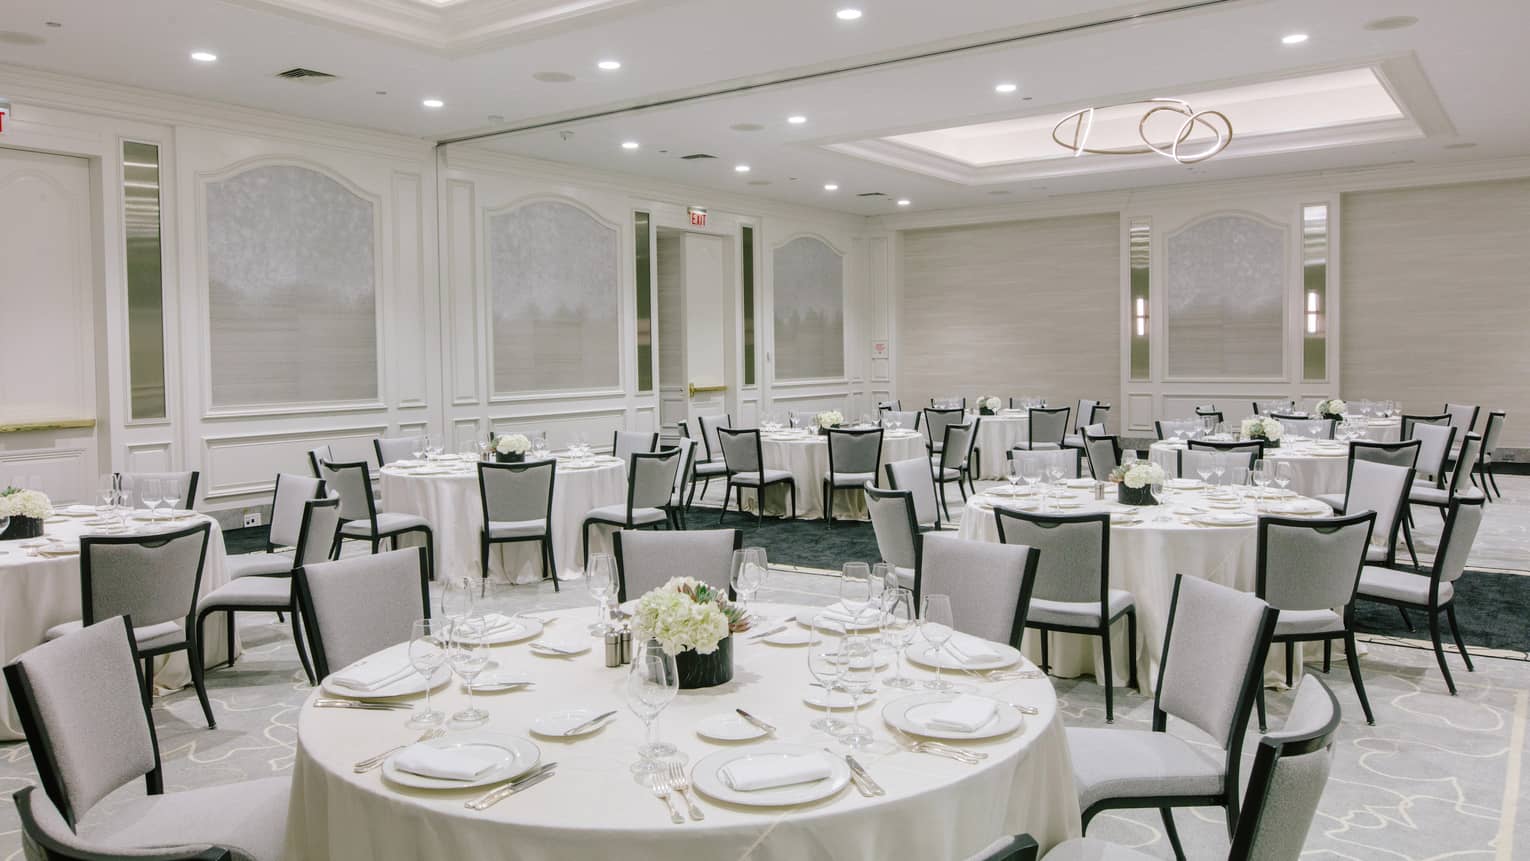 A large room with round tables covered in white cloth.